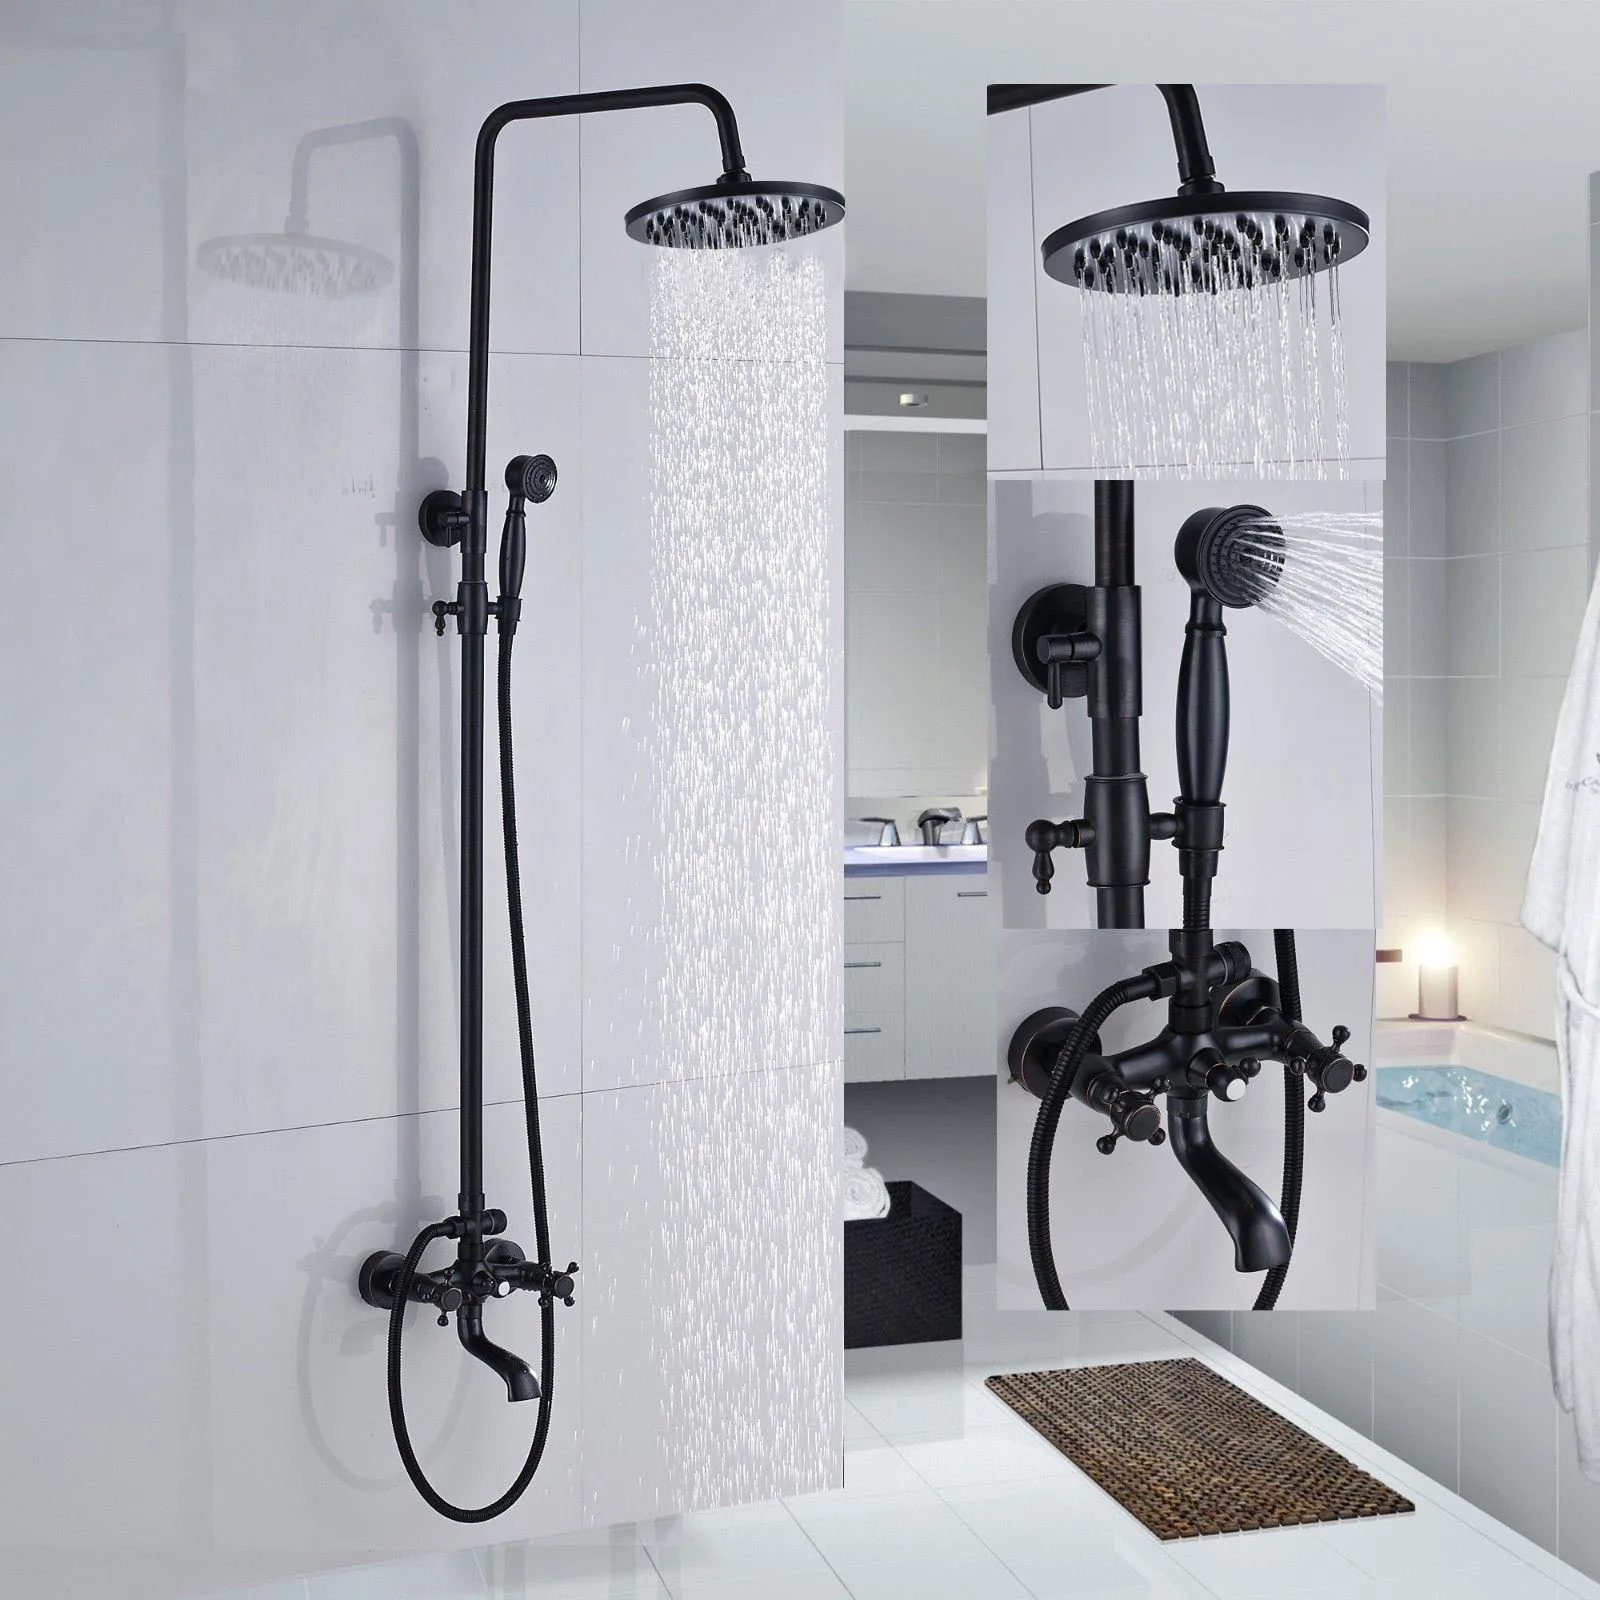 

Shower Faucets Oil Rubbed Bronze Bathroom Rainfall Shower Faucet Set Mixer Tap With Hand Sprayer Wall Mounted ZD227